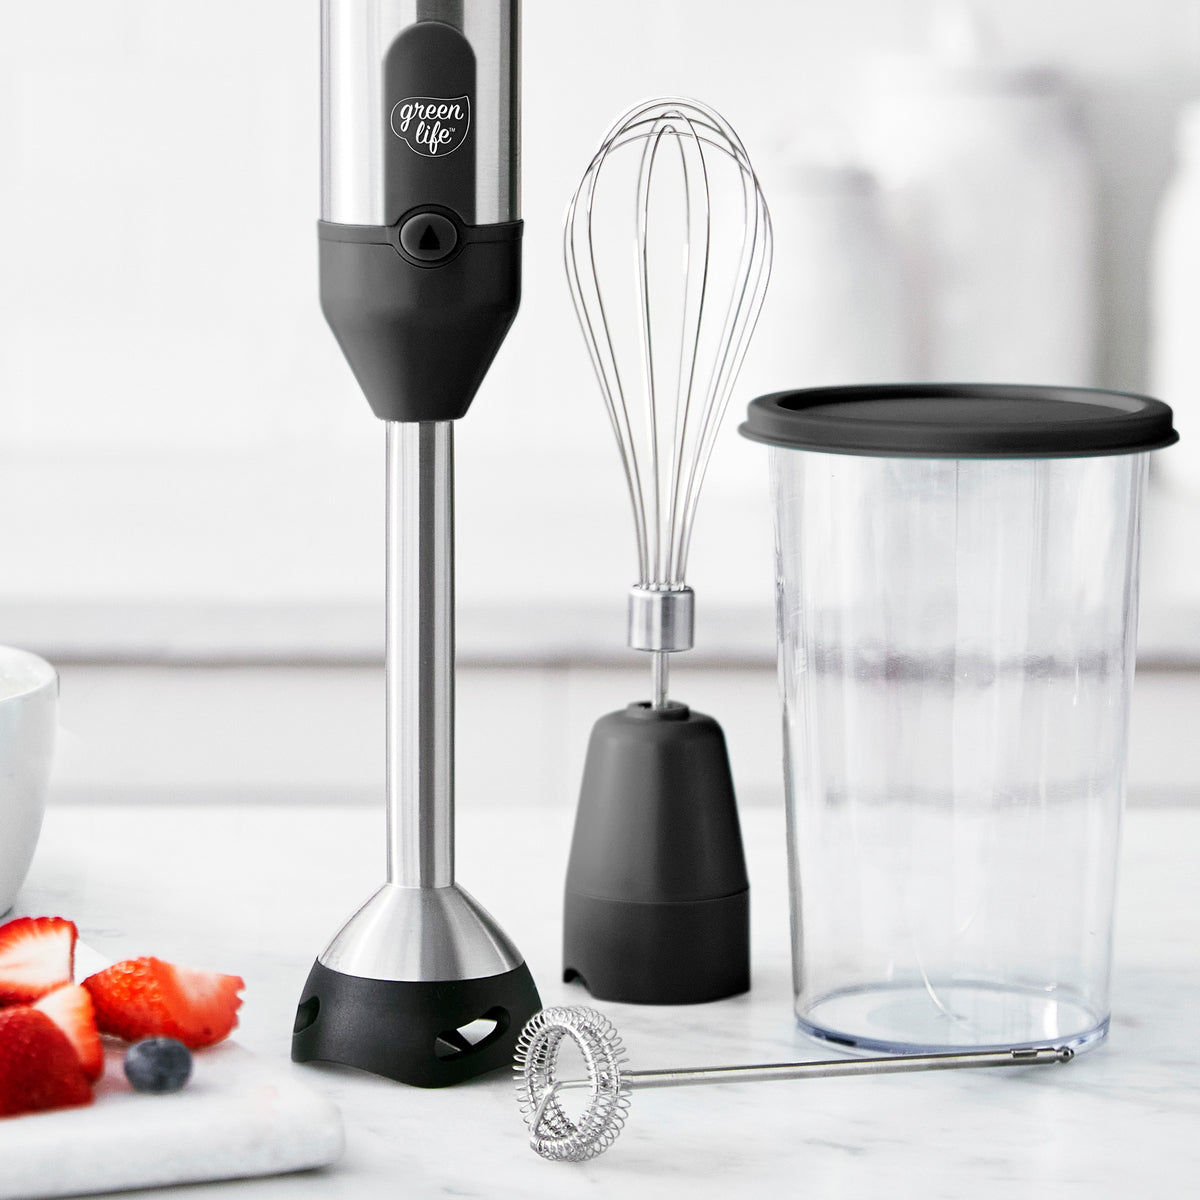 Braun MultiQuick Hand Blender / Food Processor: Lead Free in All